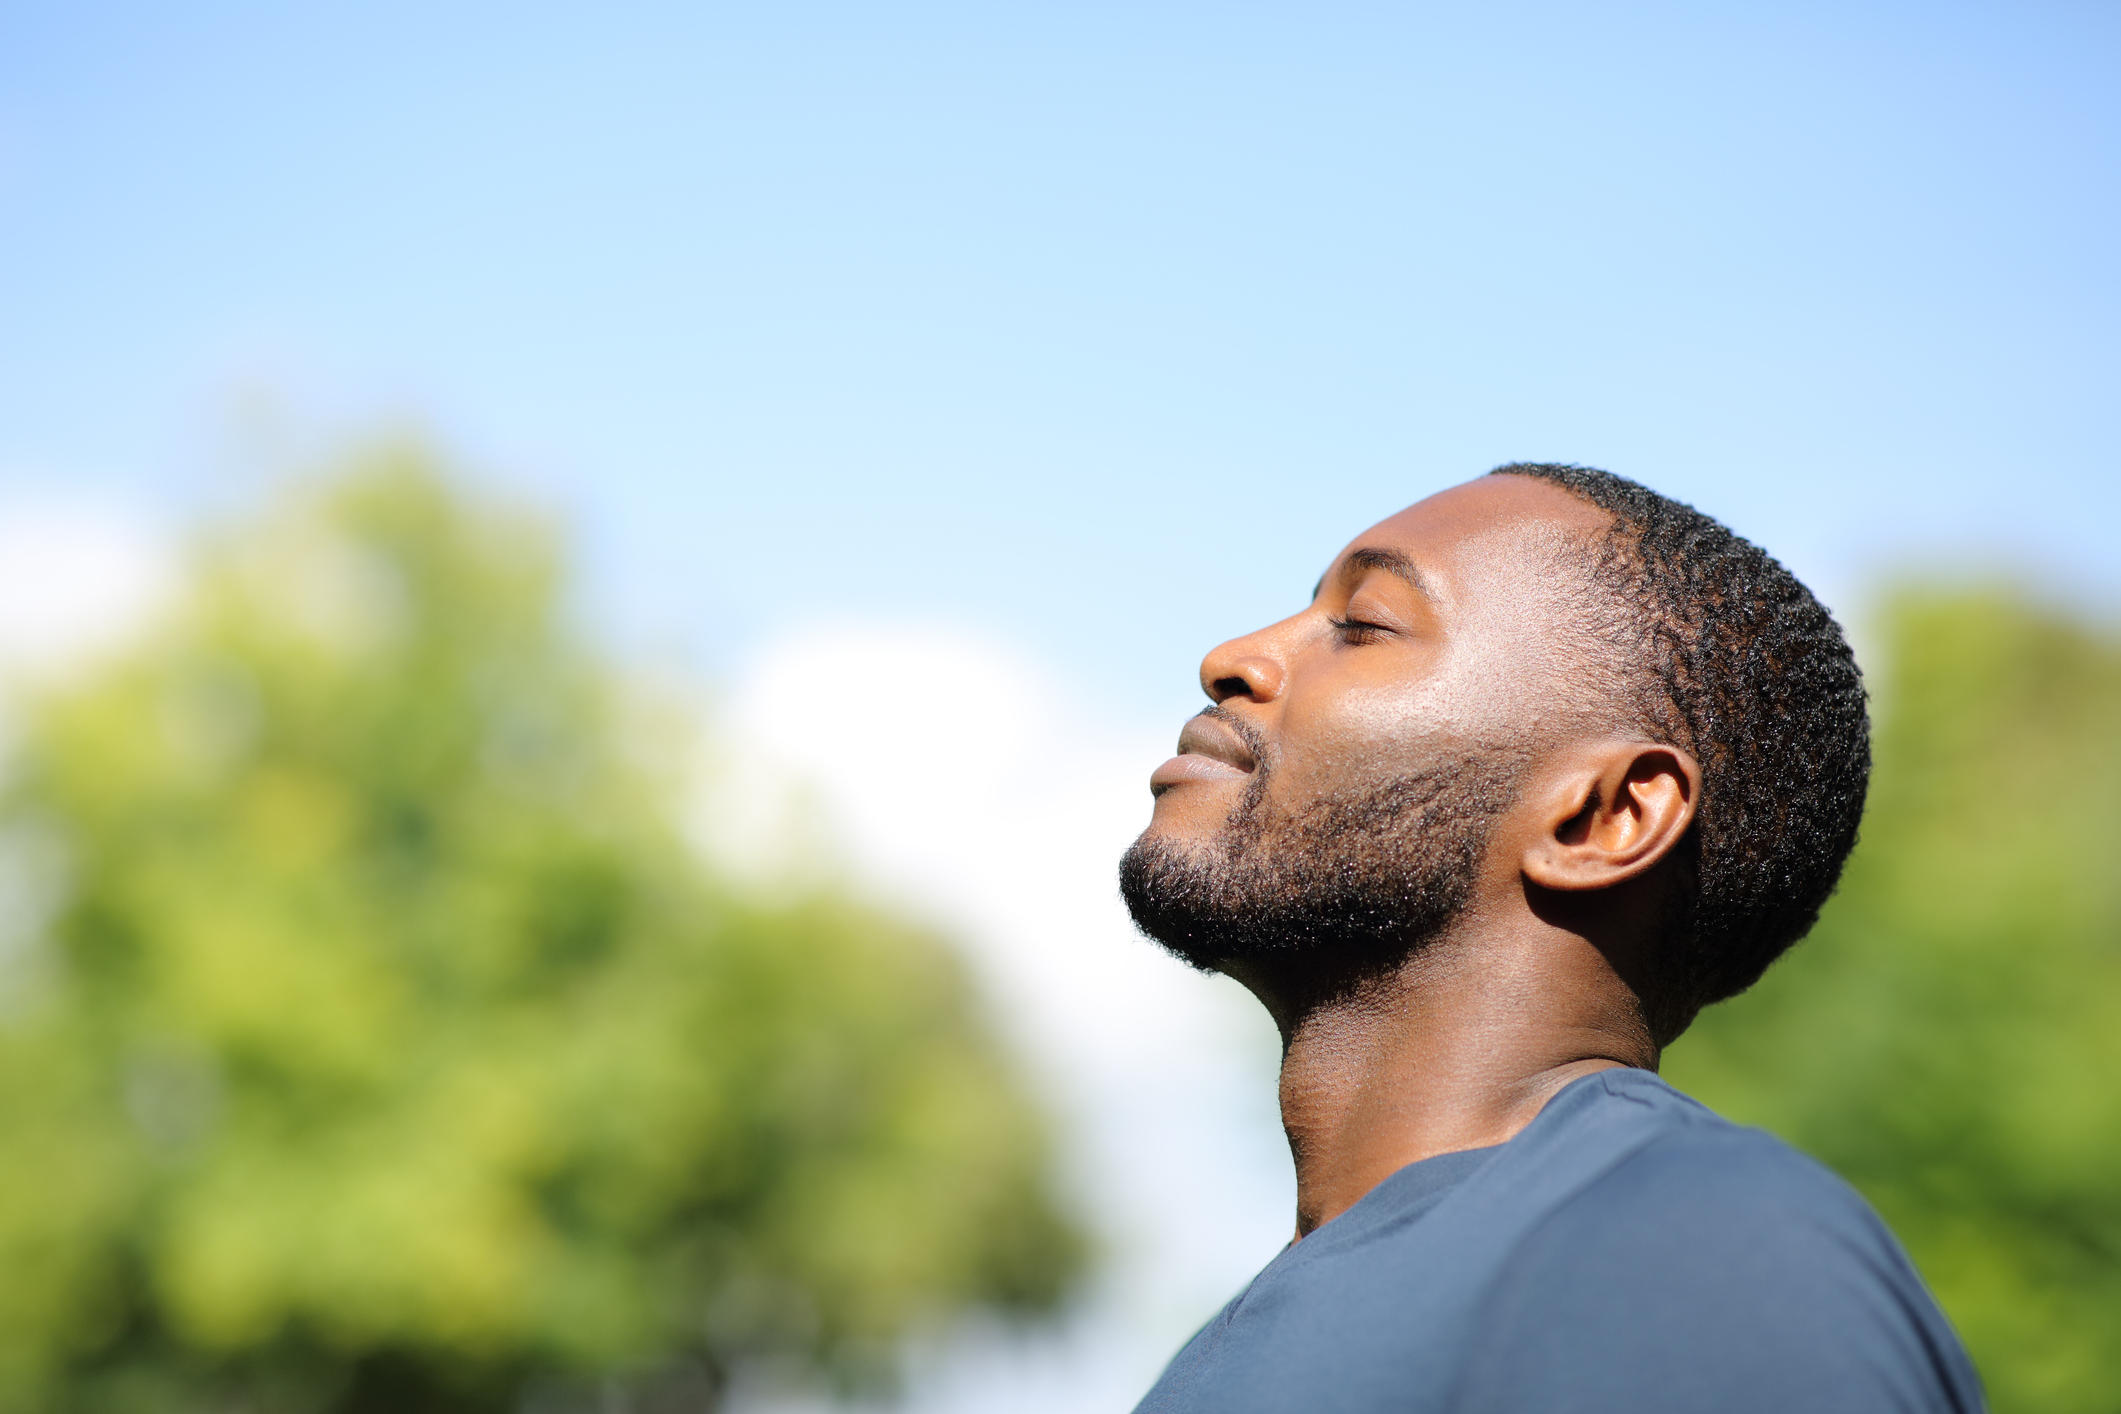 Profile of a man breathing fresh air in nature